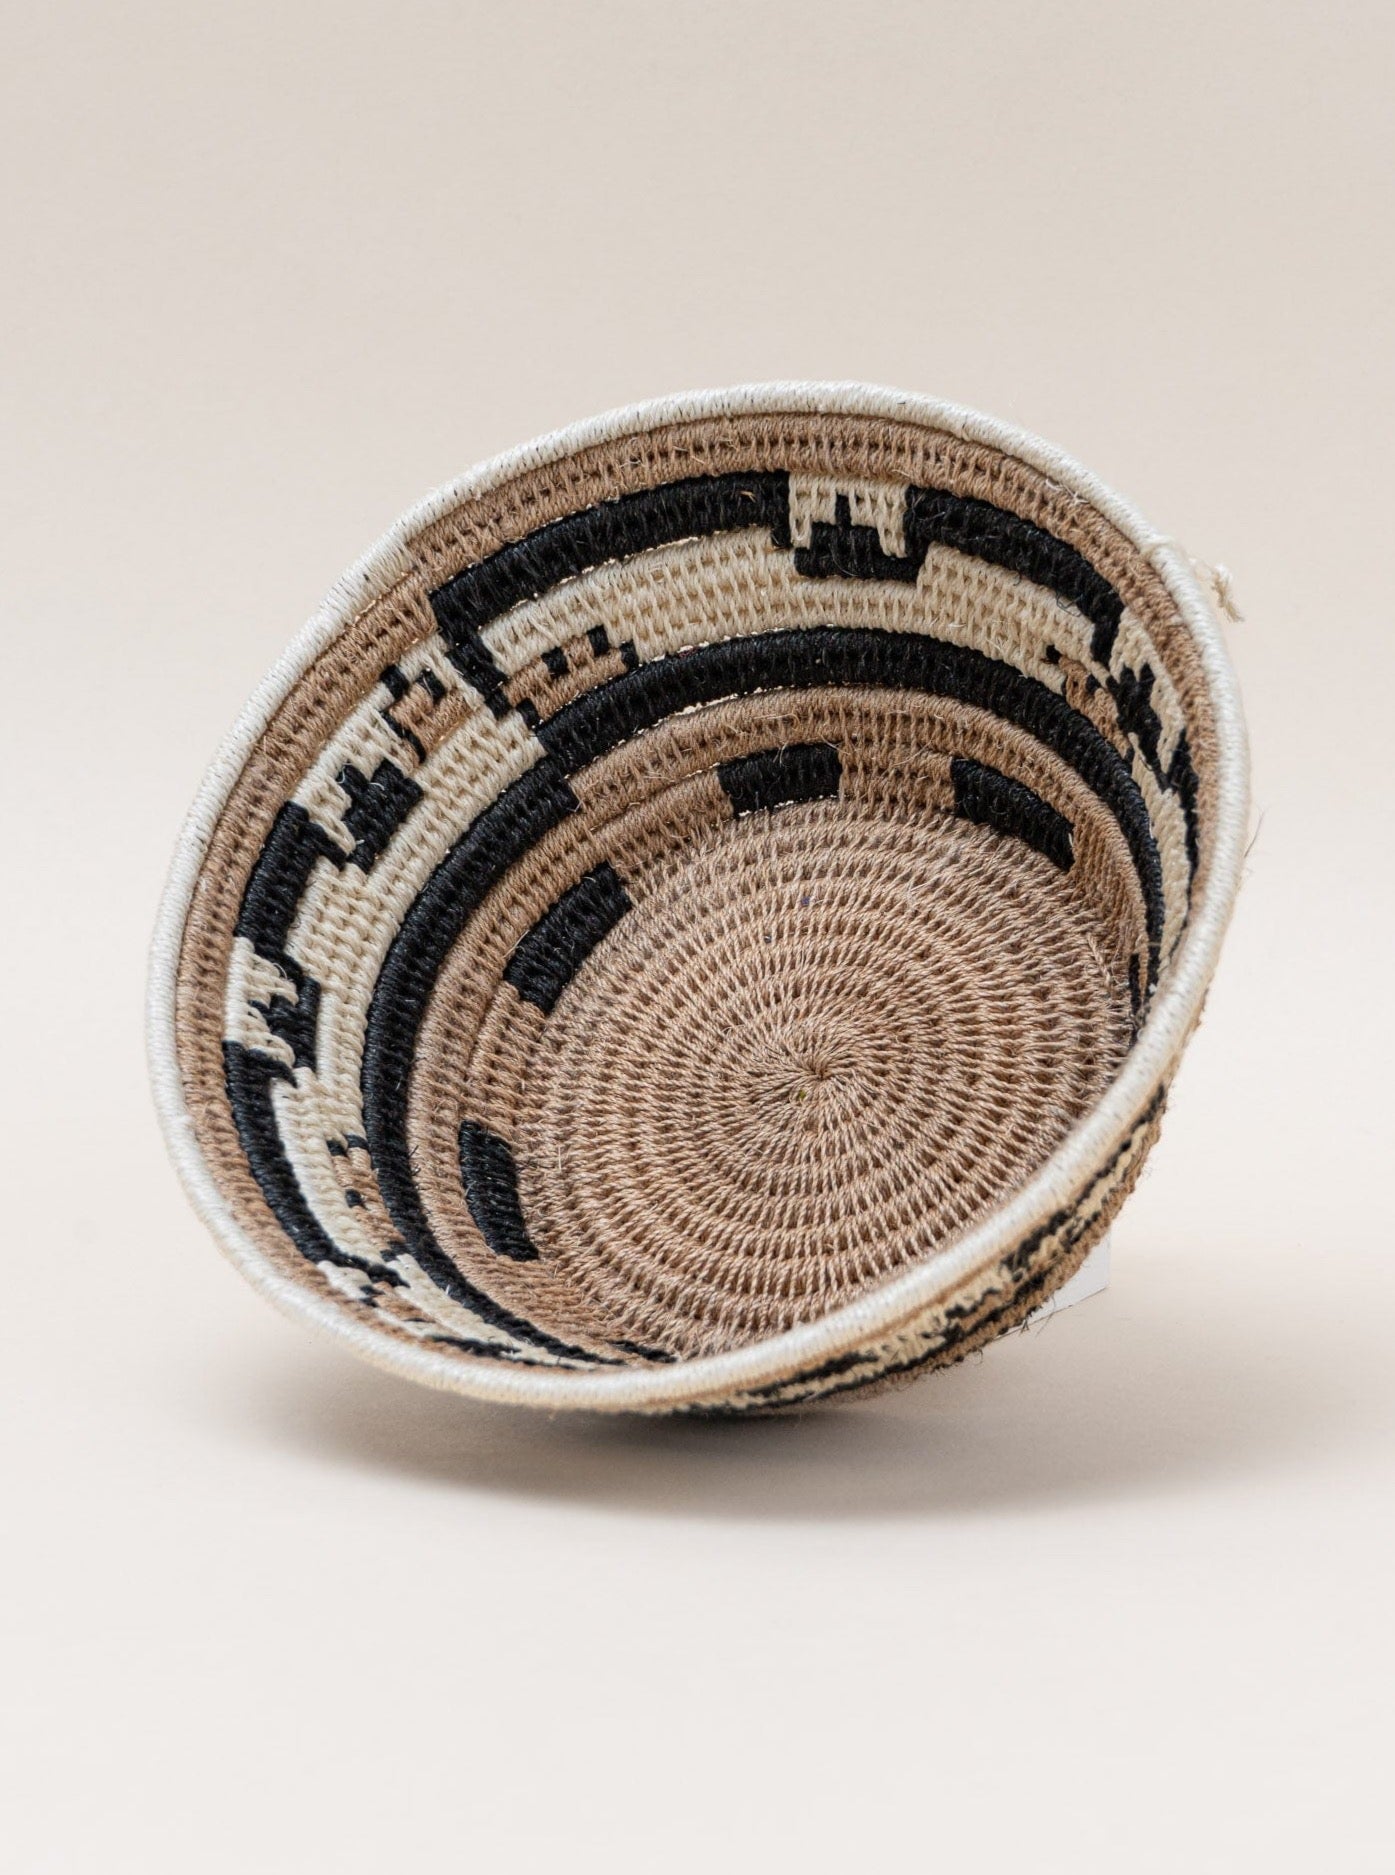 A handmade black and white woven sisal catchall basket, showcasing Swazi weaving techniques, on a white surface.